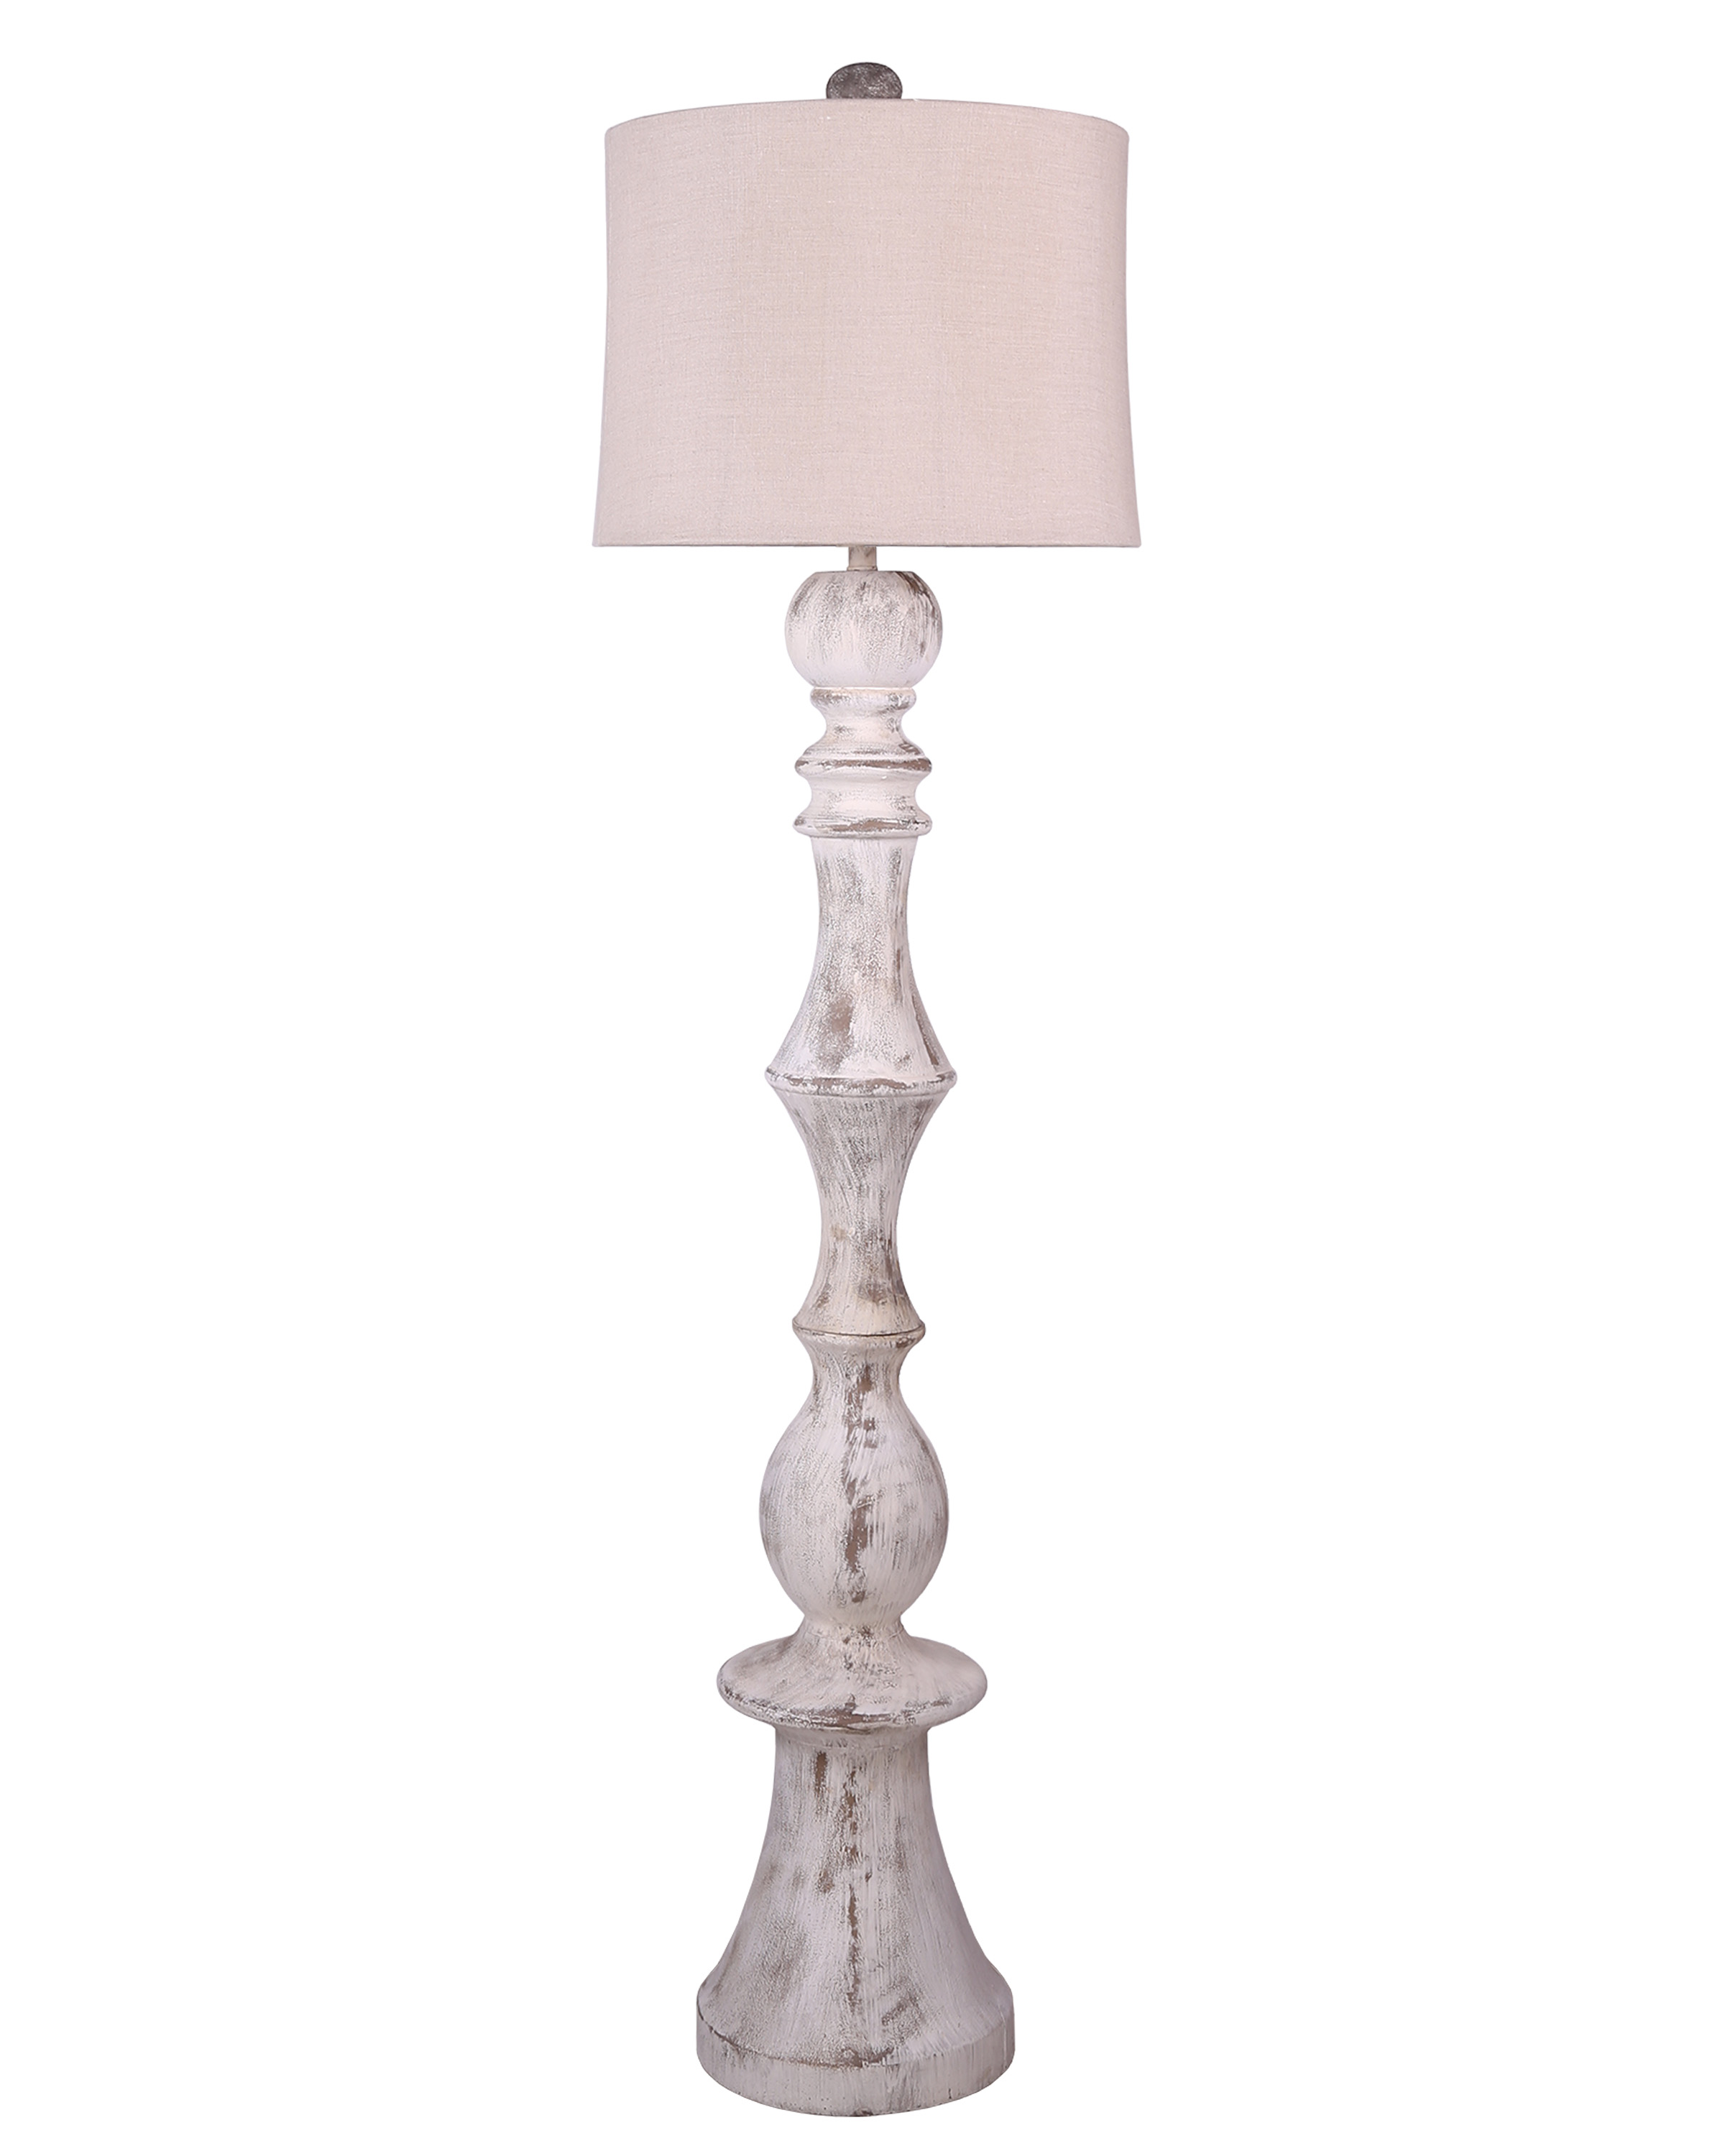 Vintage Marble Chess Base Floor Lamp with Multiple Shade Colors